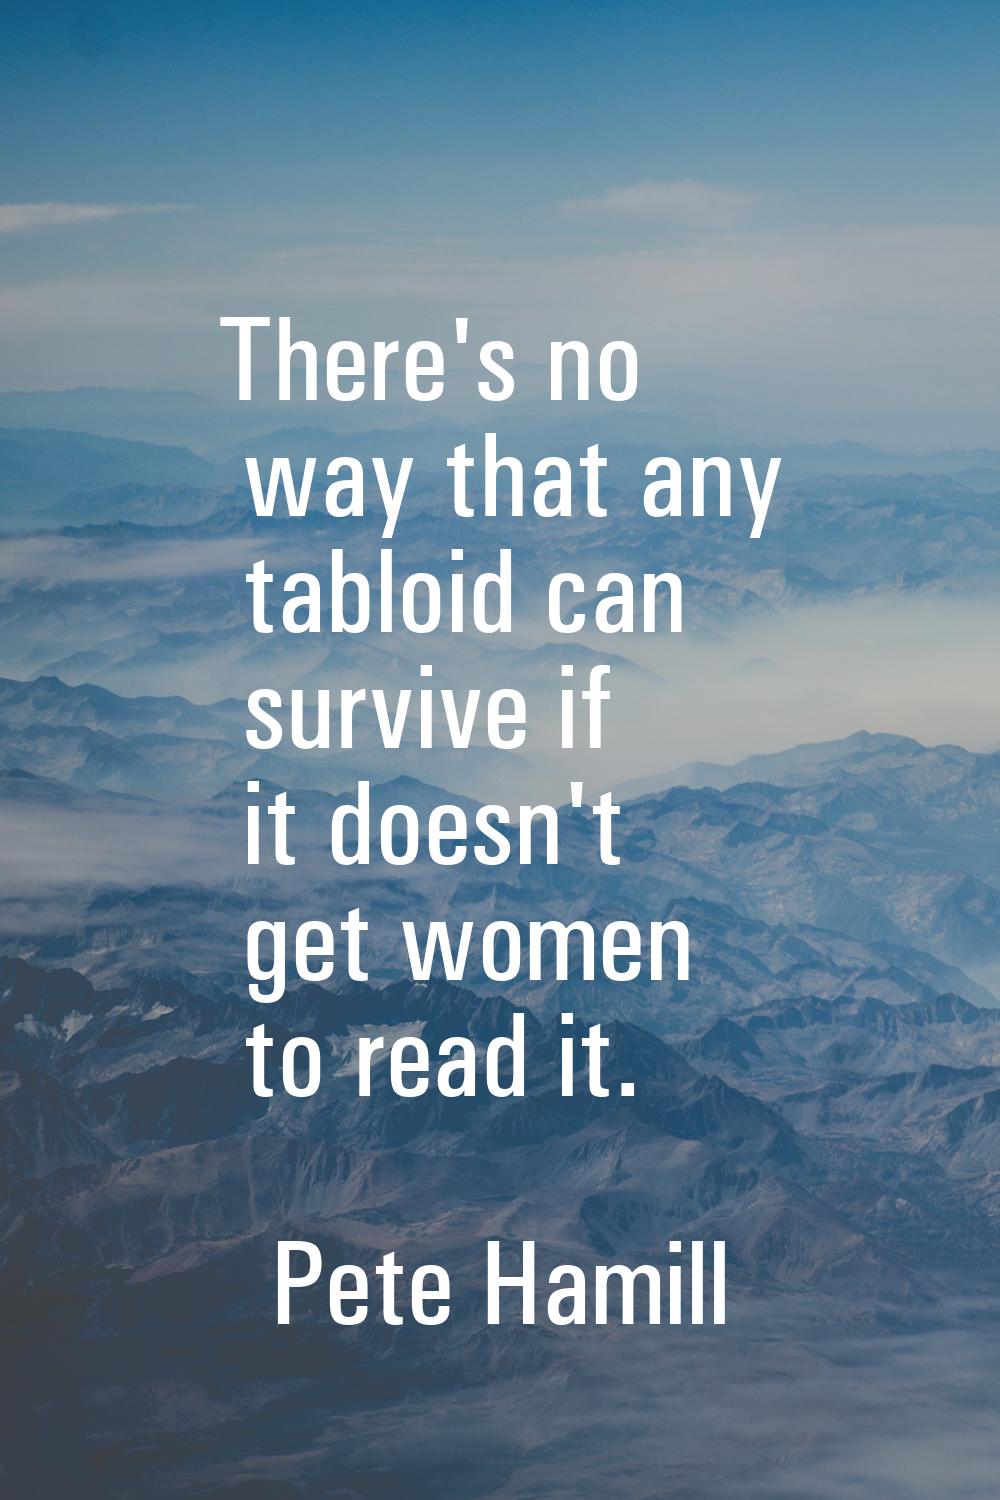 There's no way that any tabloid can survive if it doesn't get women to read it.